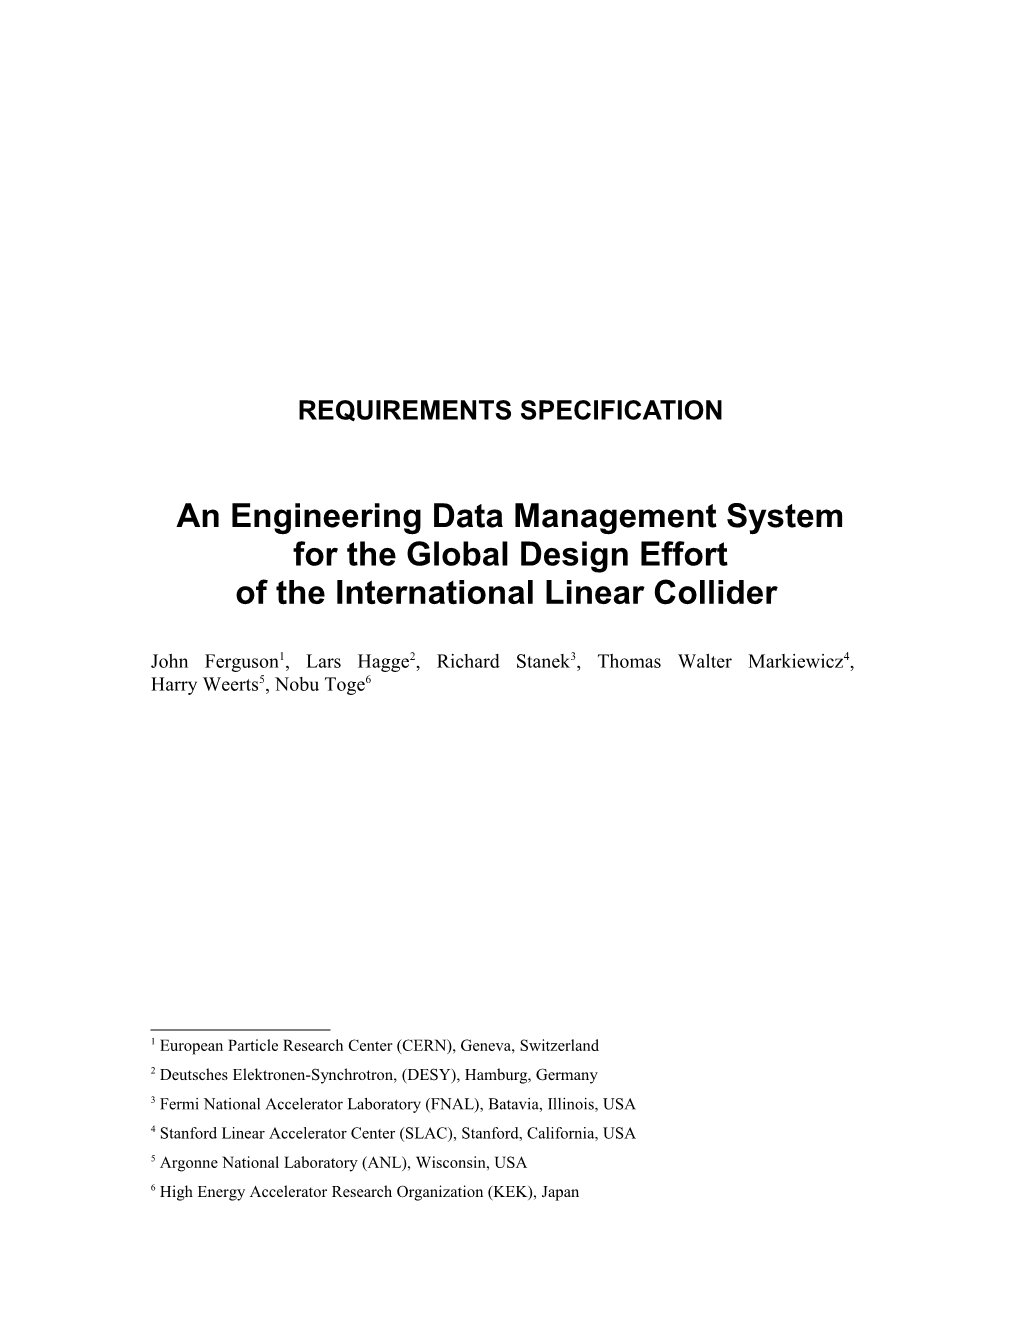 An Engineering Data Management System for the Global Design Effort of the International